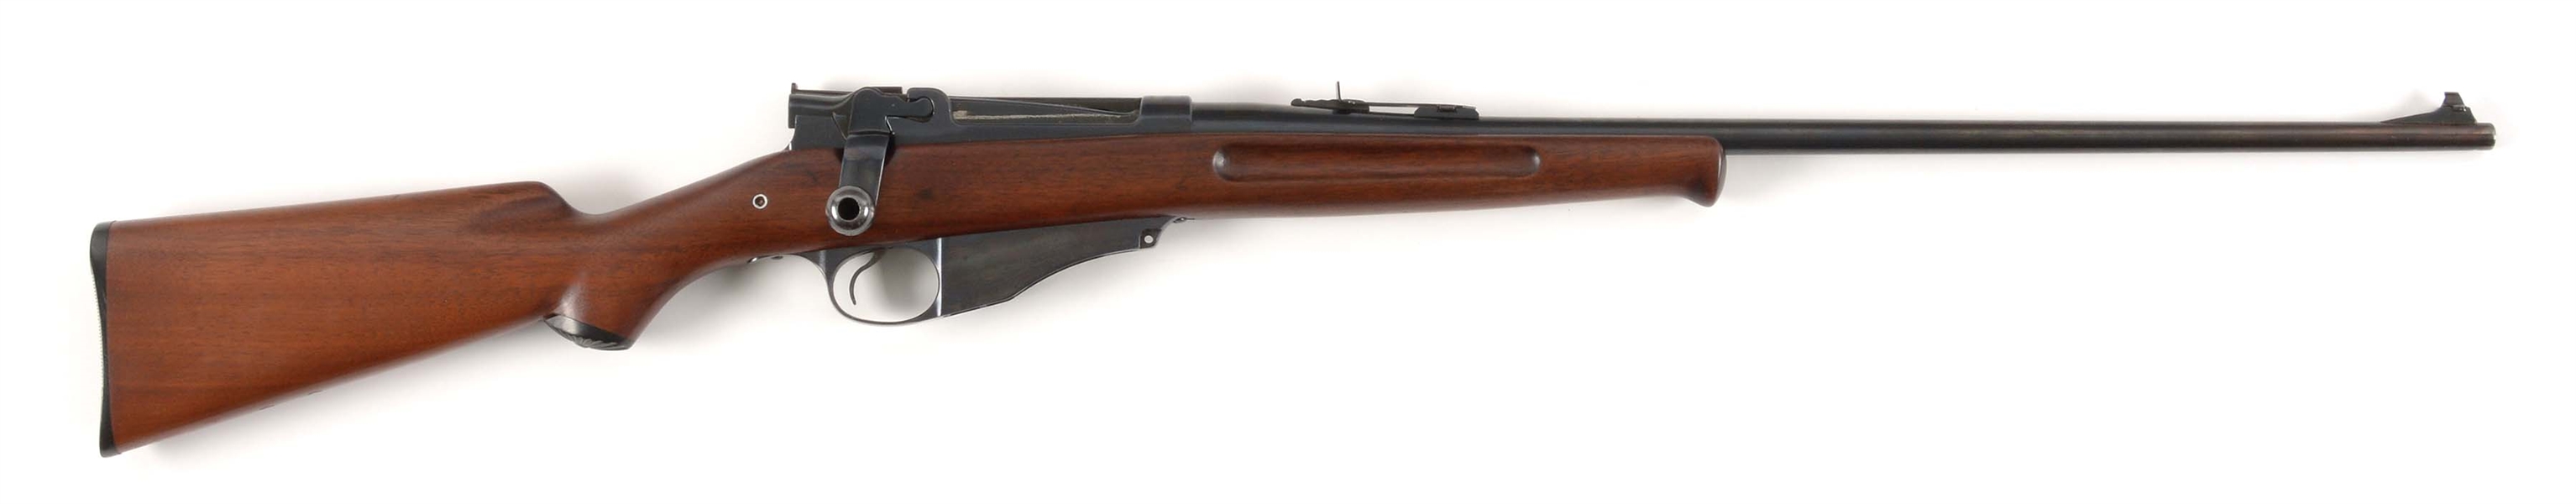 (C) WINCHESTER 1895 LEE NAVY 6MM STRAIGHT PULL RIFLE 